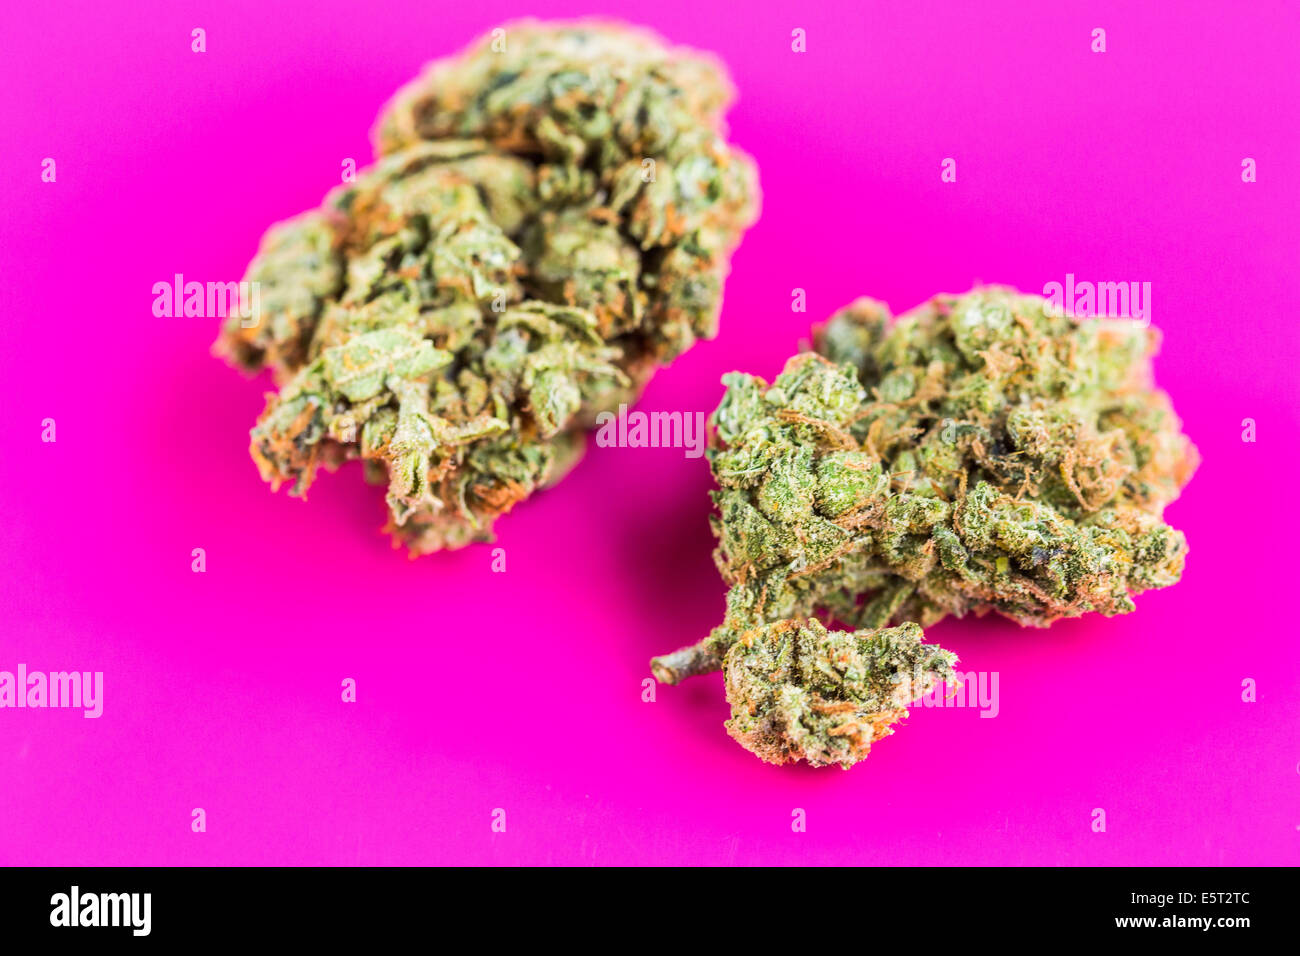 Flowering tops from the plant Cannabis sativa. Stock Photo